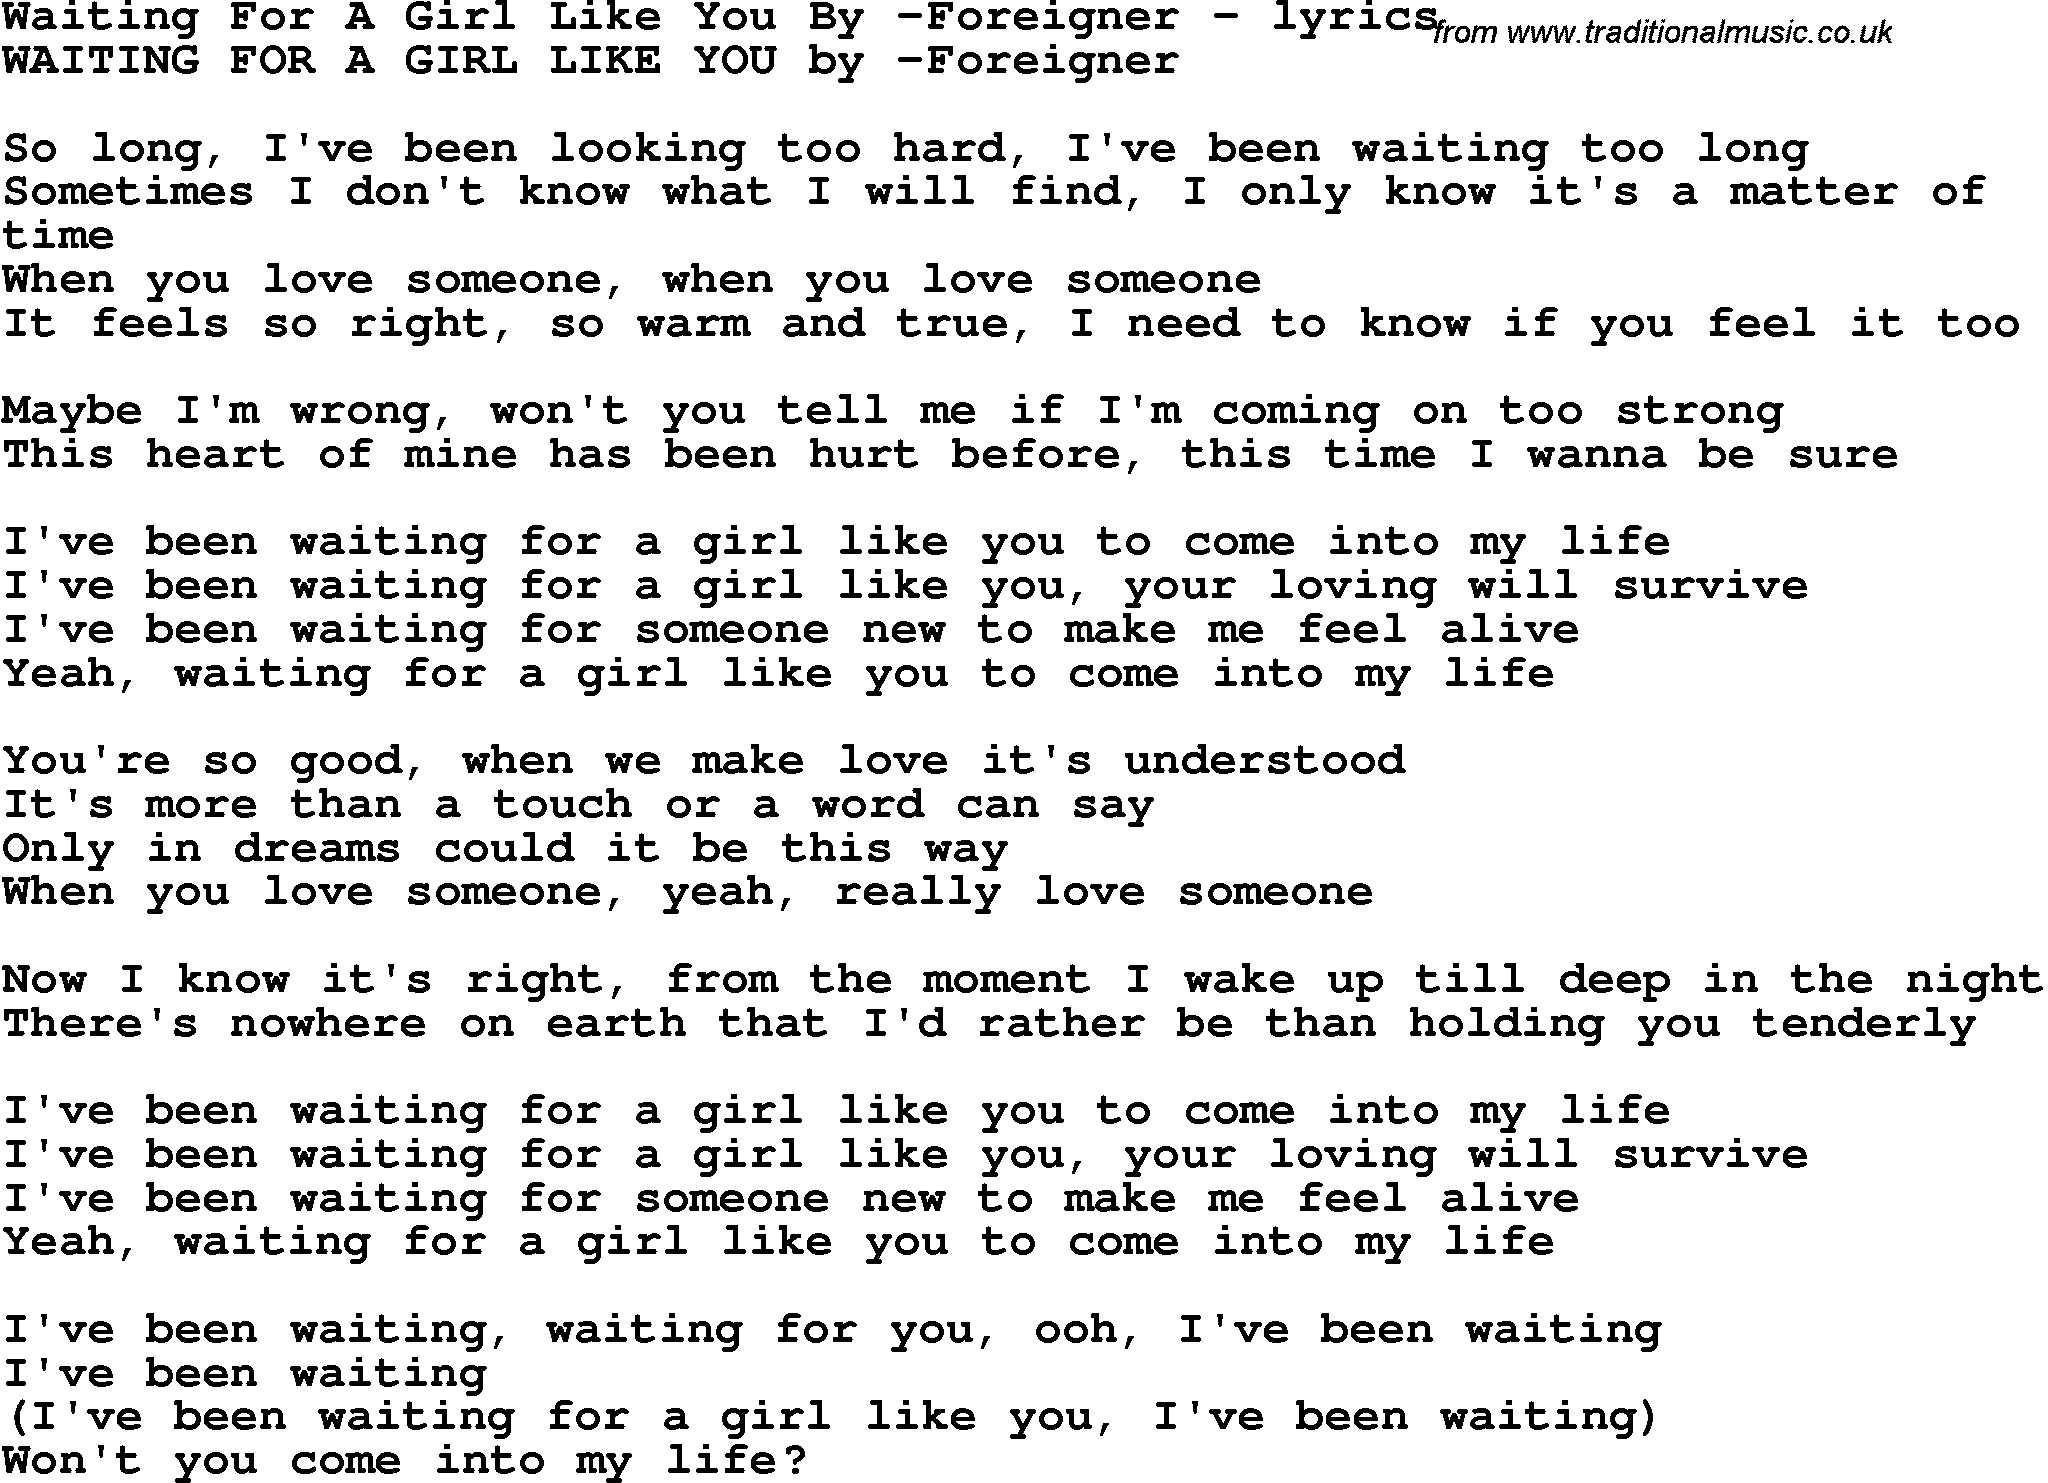 Love Song Lyrics For Waiting For A Girl Like You By Foreigner